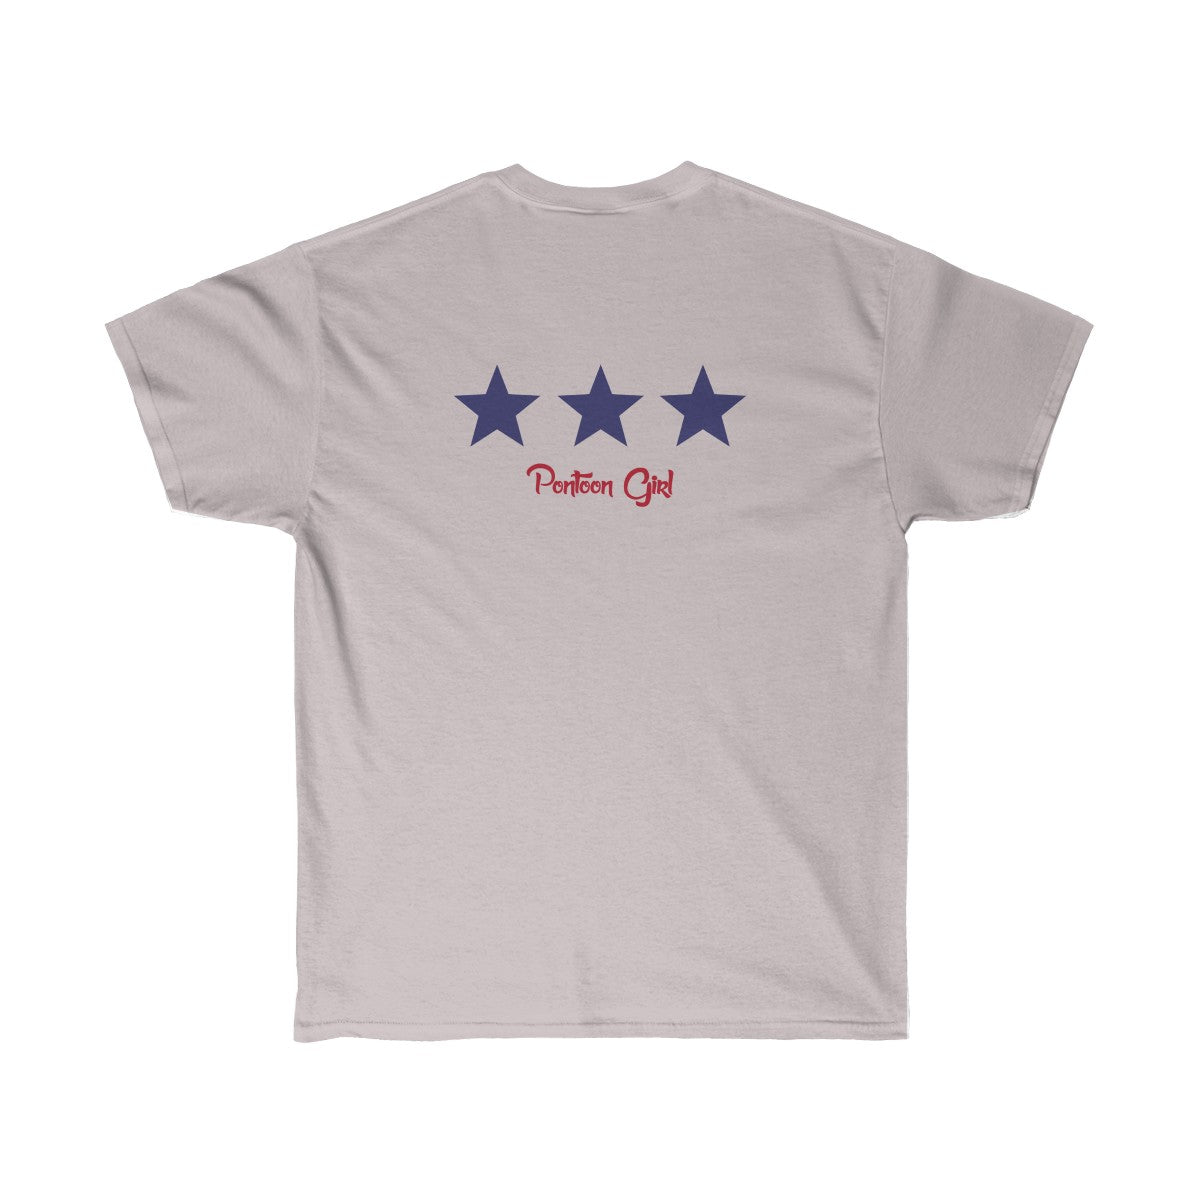 Pontoon Girl - Red White and Toon - Classic American Flag - TWO SIDED T shirt